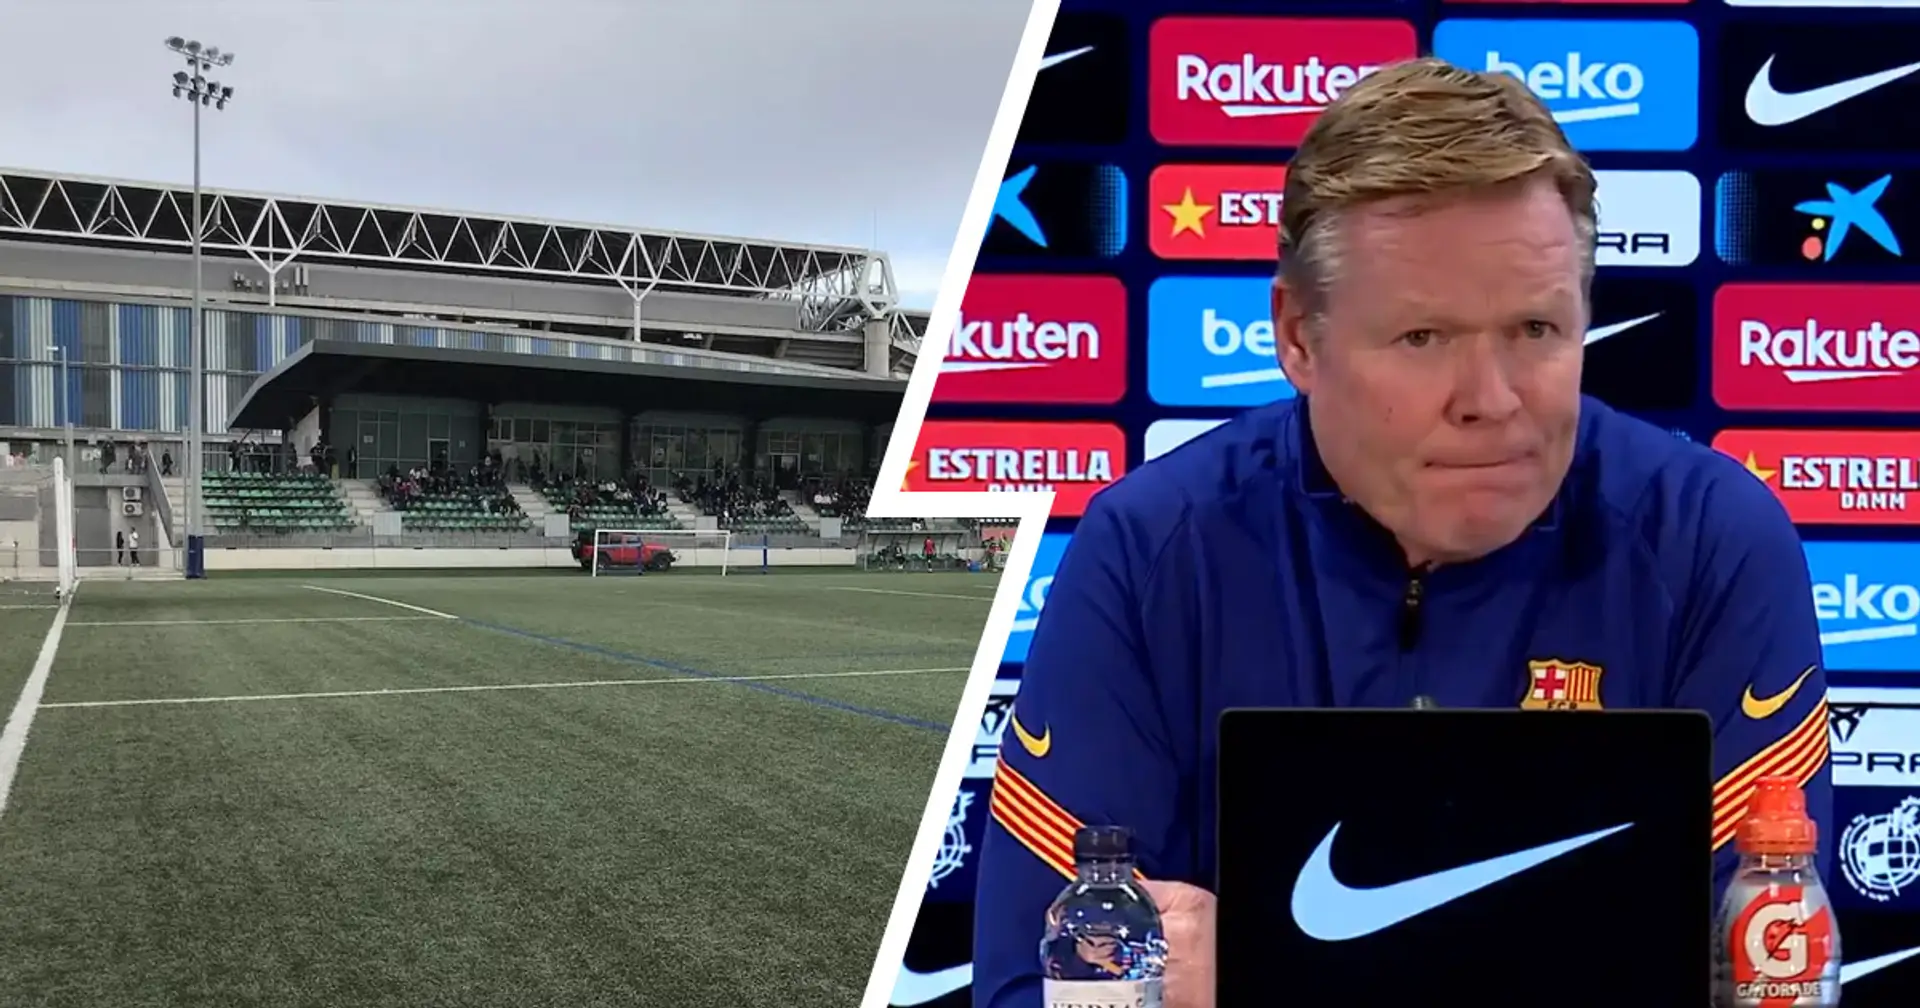 'It's not football for me': Koeman not a fan of playing on artificial pitch at Cornella